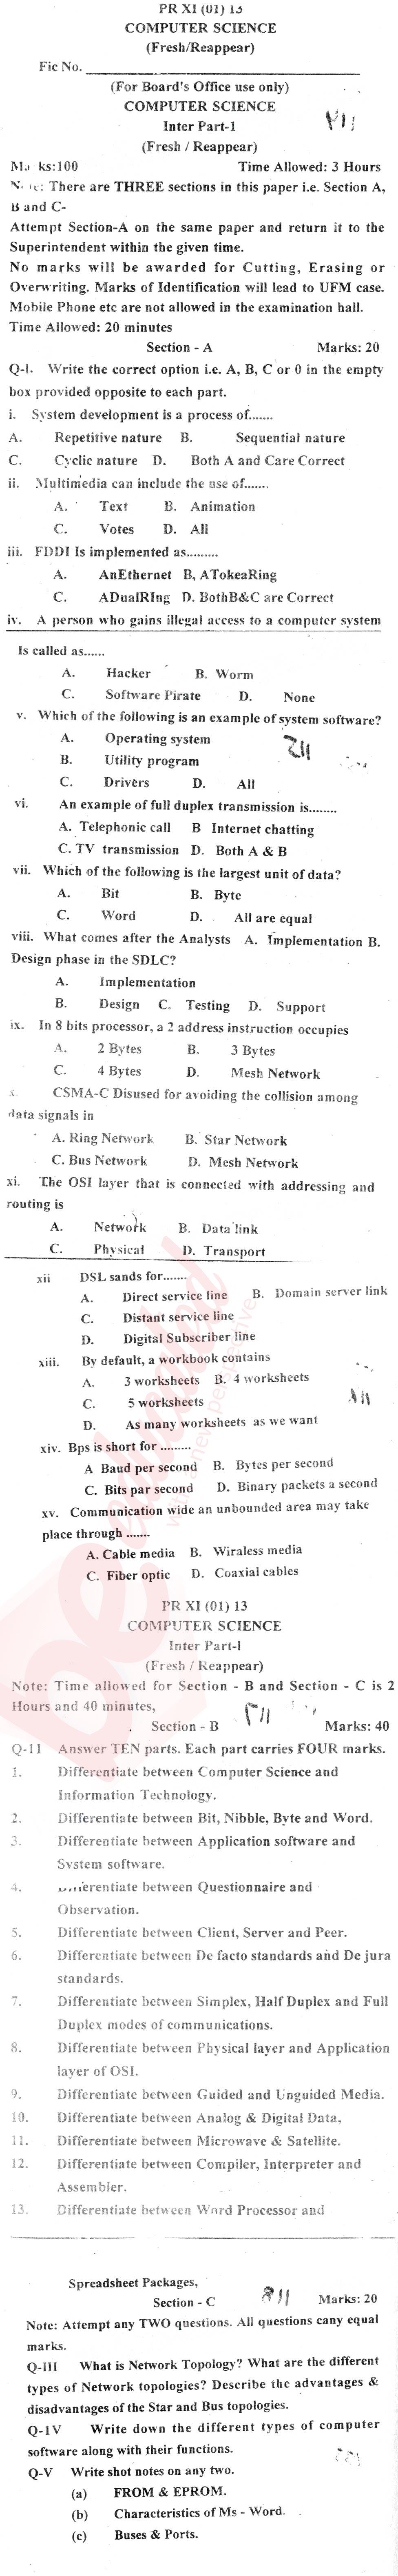 Computer Science ICS Part 1 Past Paper Group 1 BISE Malakand 2013